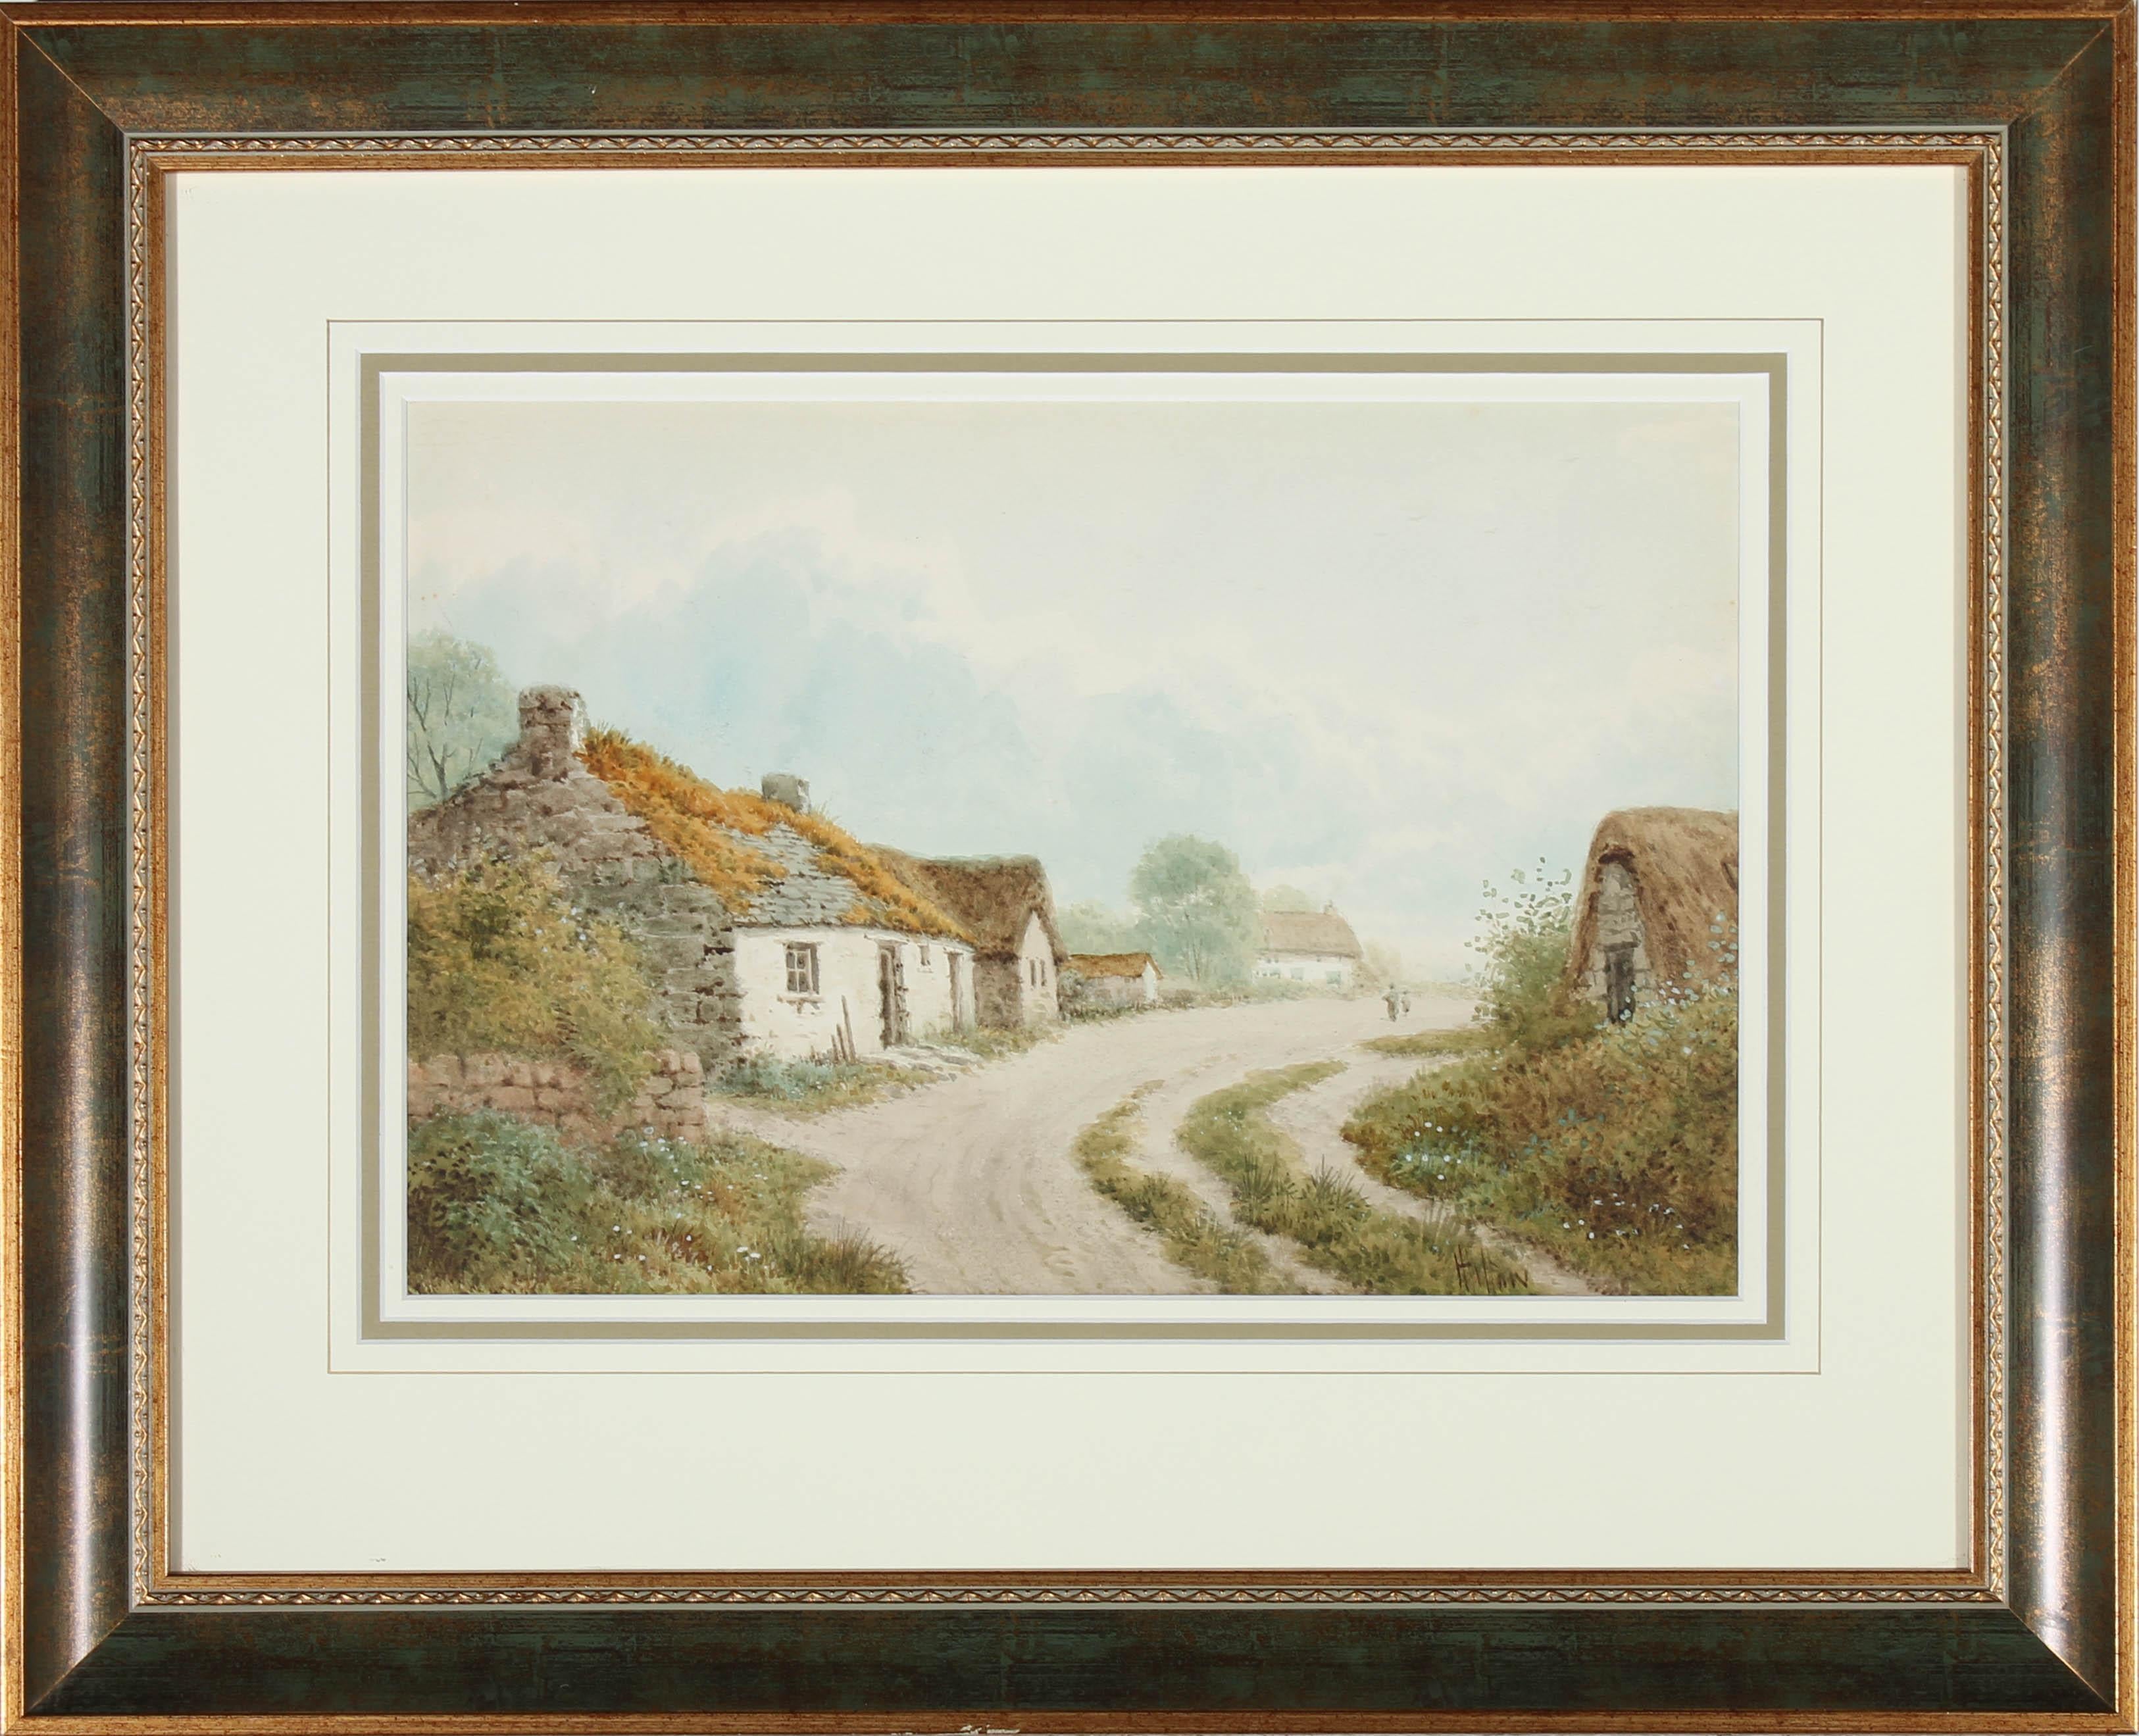 A late 19th century watercolour from artist Henry Hilton, known for his pastoral scenes and English landscapes. This piece depicts a quaint village street with a cottage and figures in the distance. Presented in a glazed part-gilt frame.